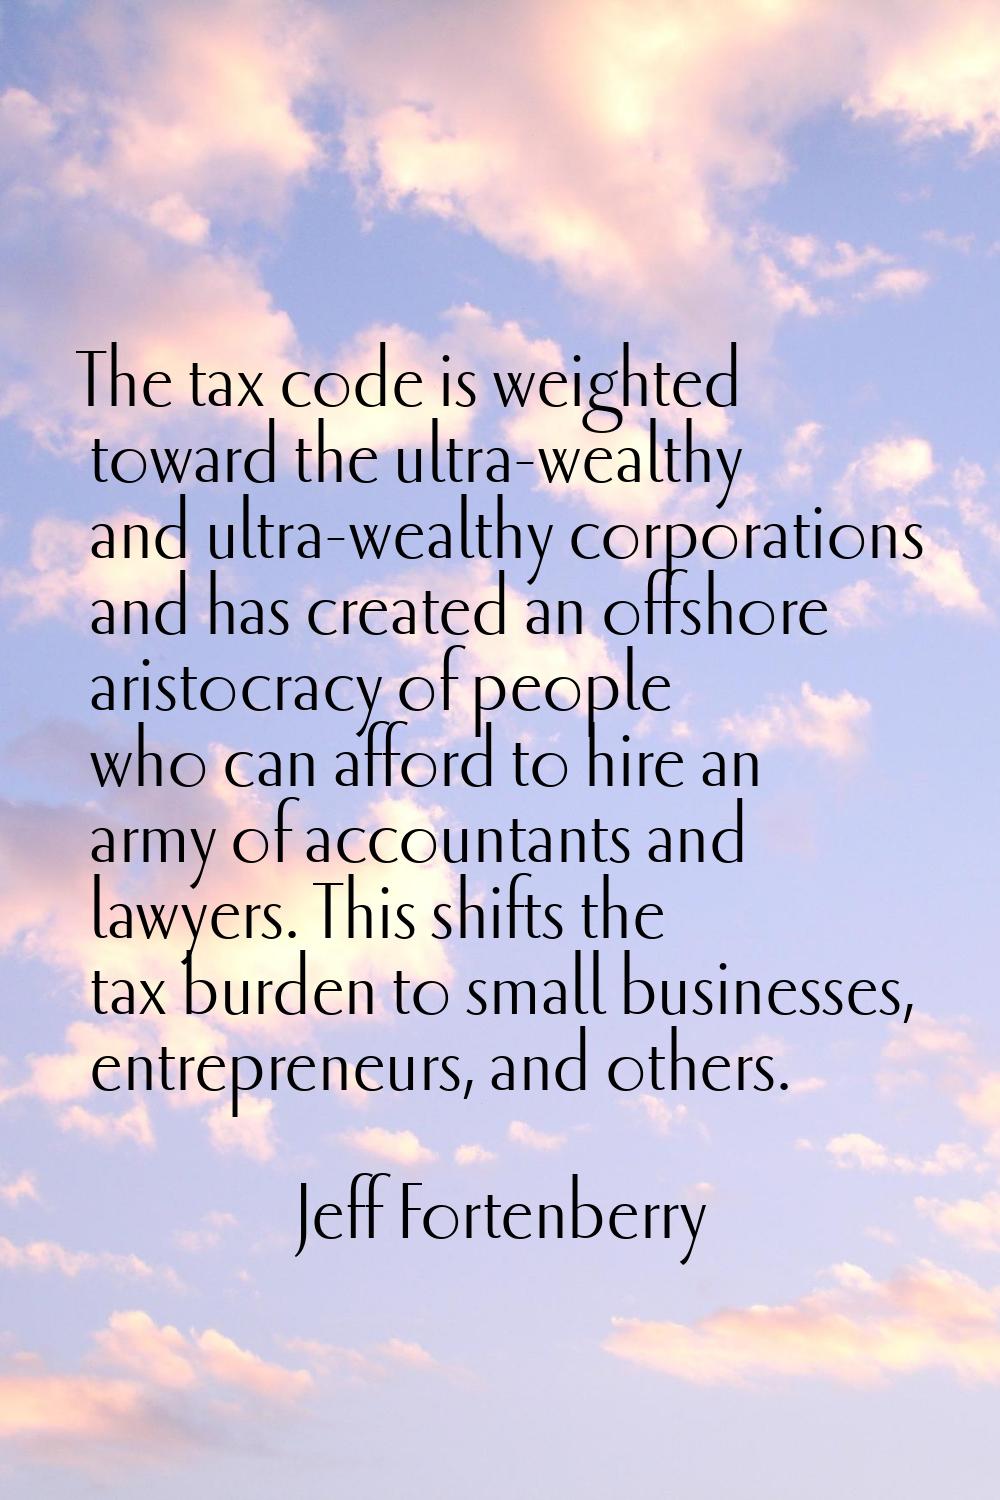 The tax code is weighted toward the ultra-wealthy and ultra-wealthy corporations and has created an